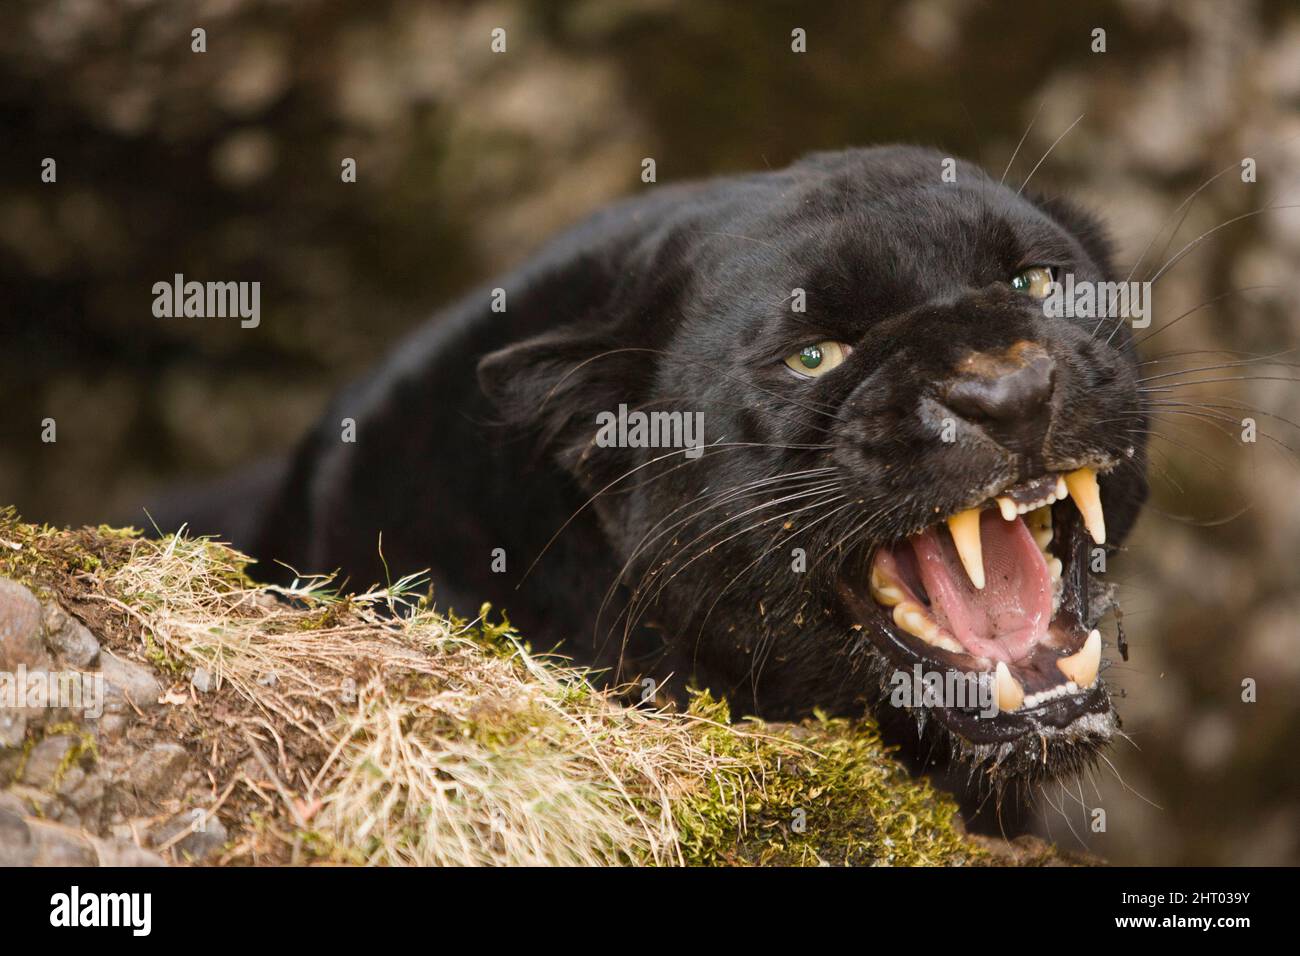 Black Leopards in India I Myths around Black Panther